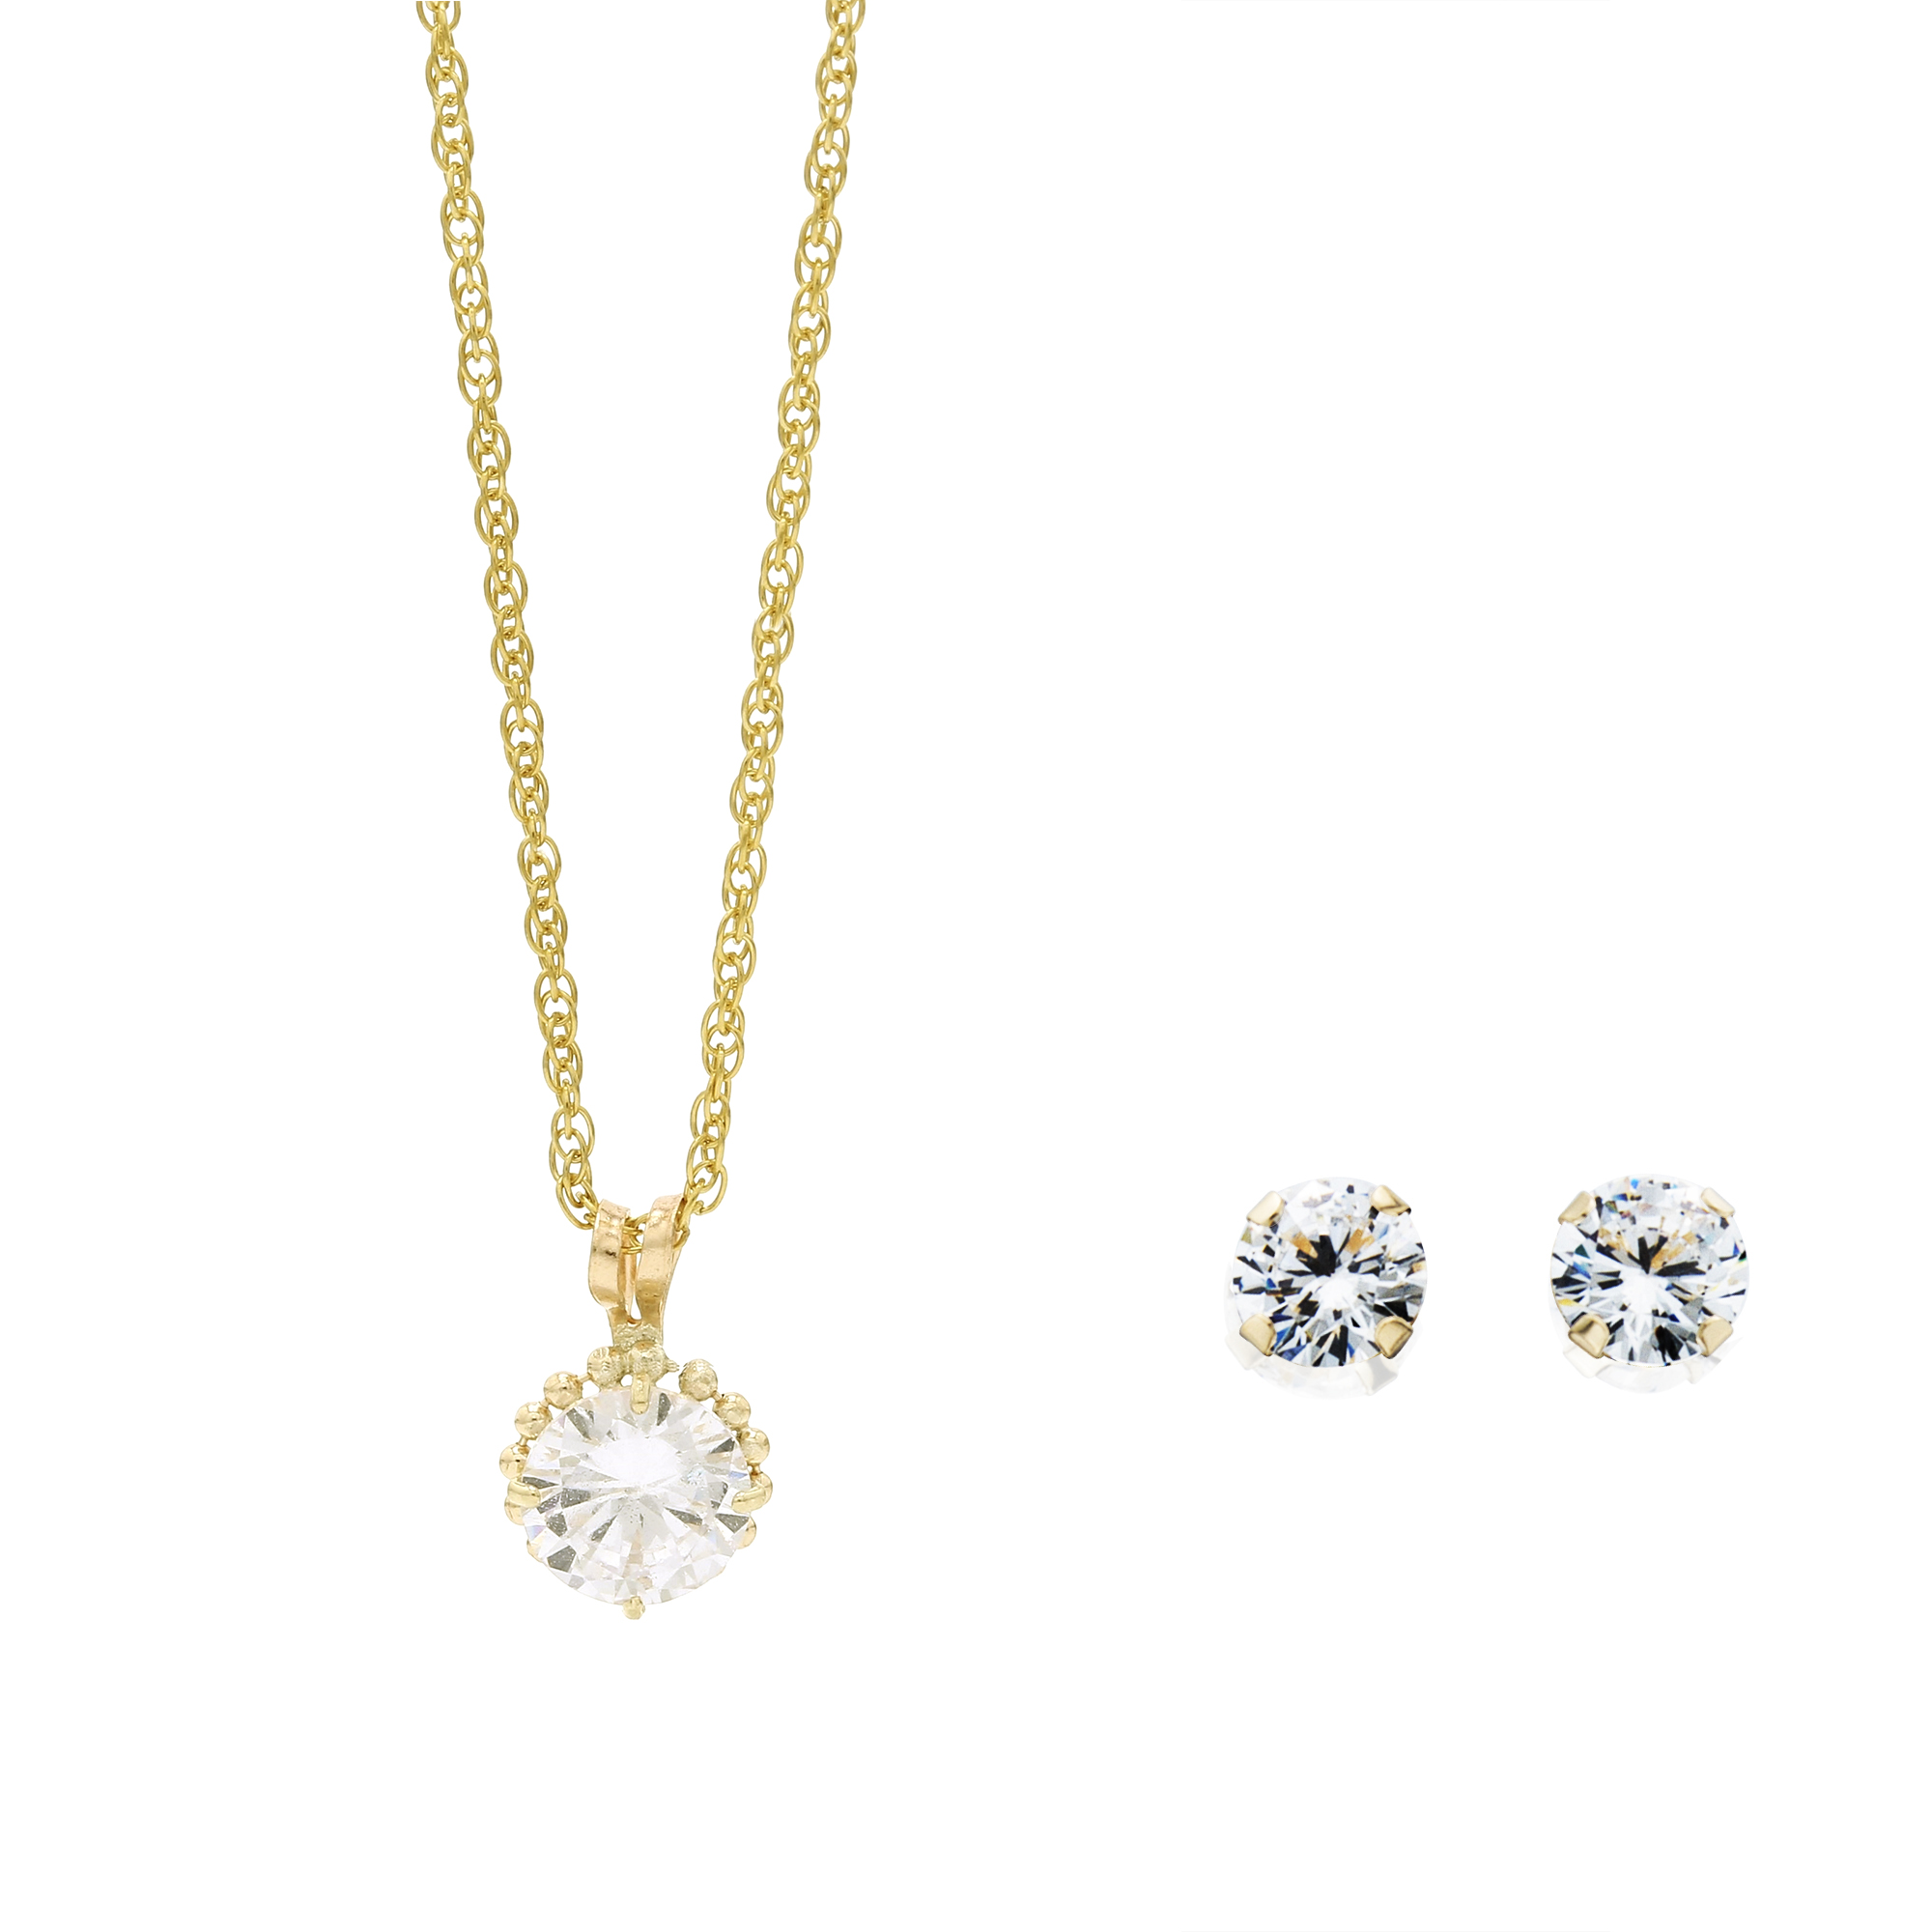 10K Yellow Gold 2 Piece Pendant and Earring Set